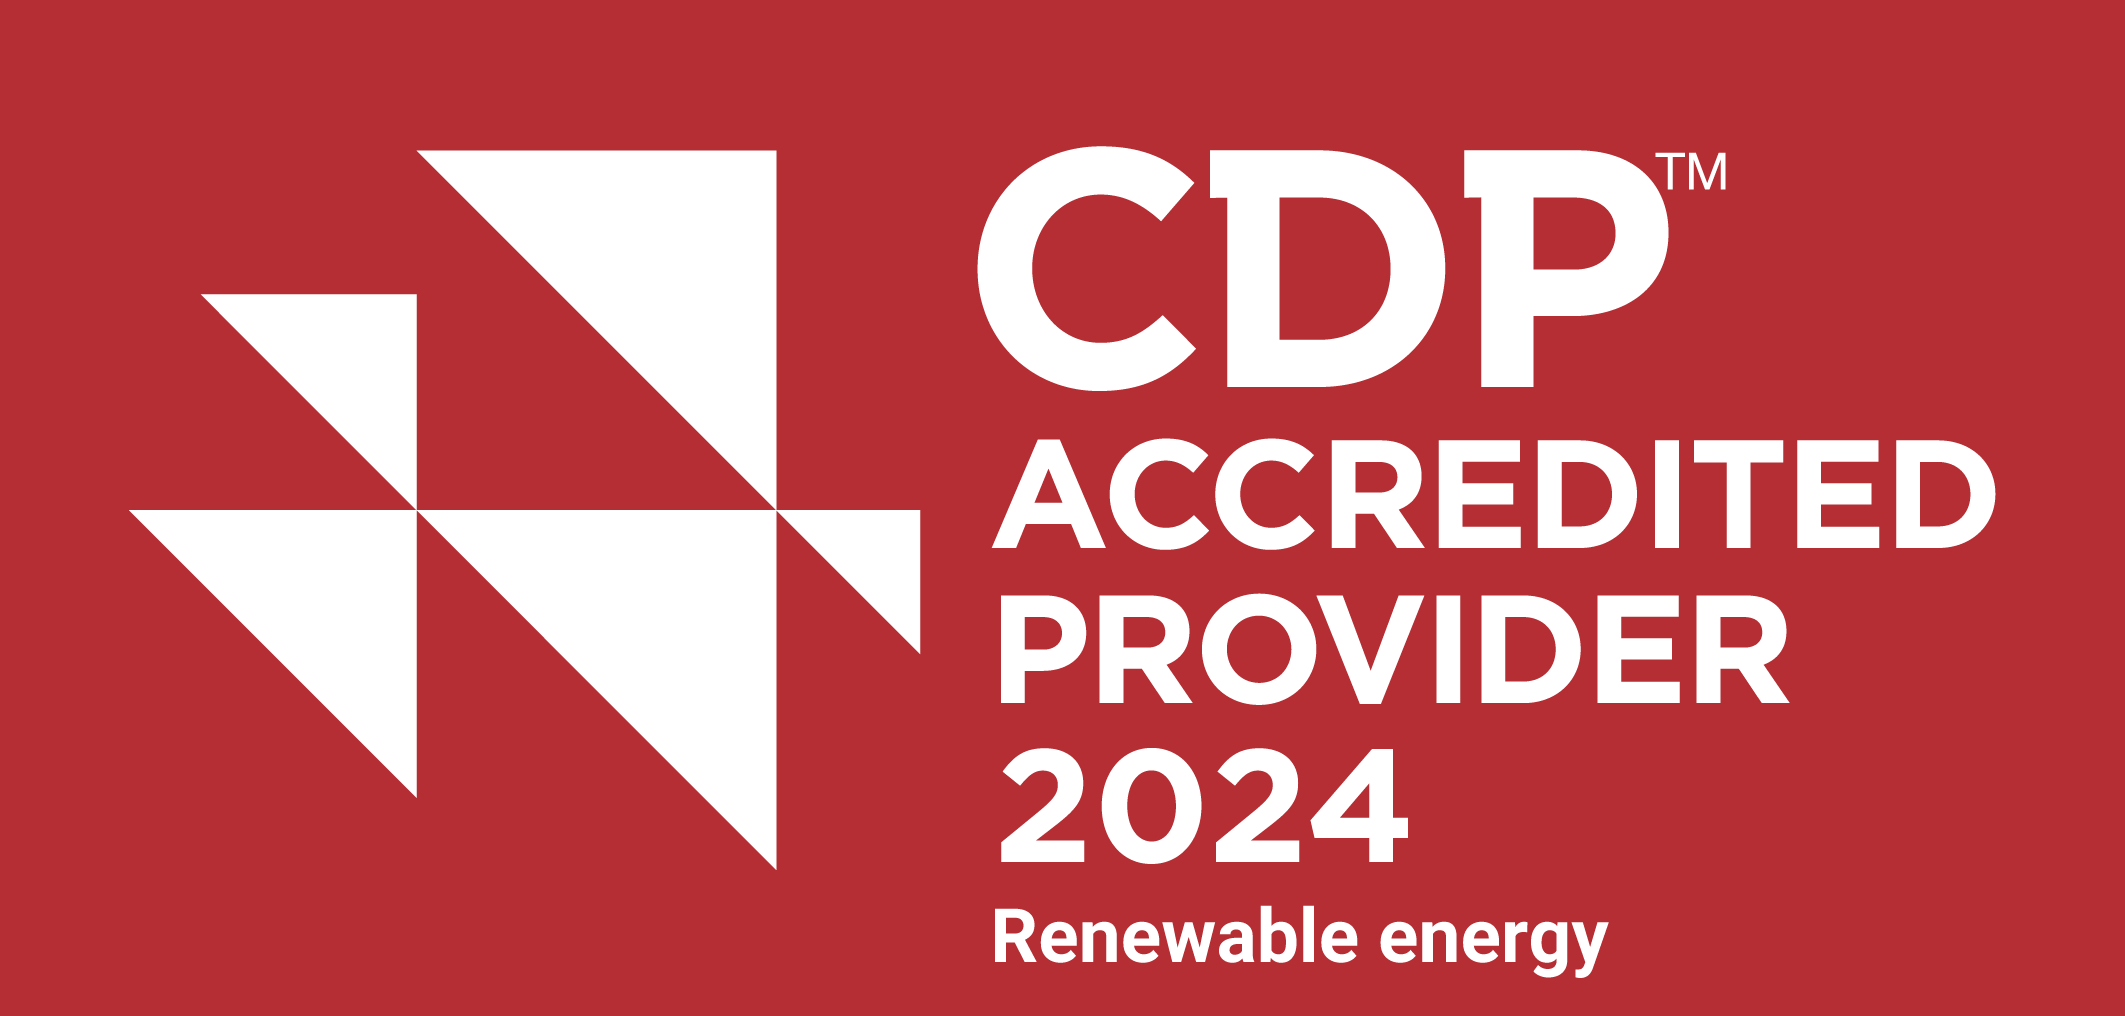 CDP ACCREDITED PROVIDER 2023